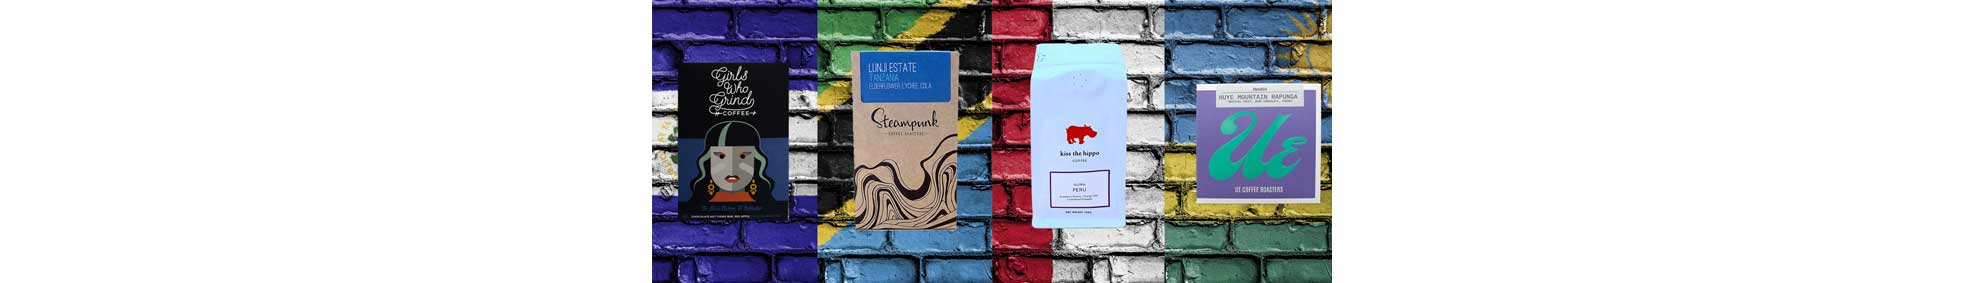 June Edition of the UK Best Coffee Subscription Dialled In